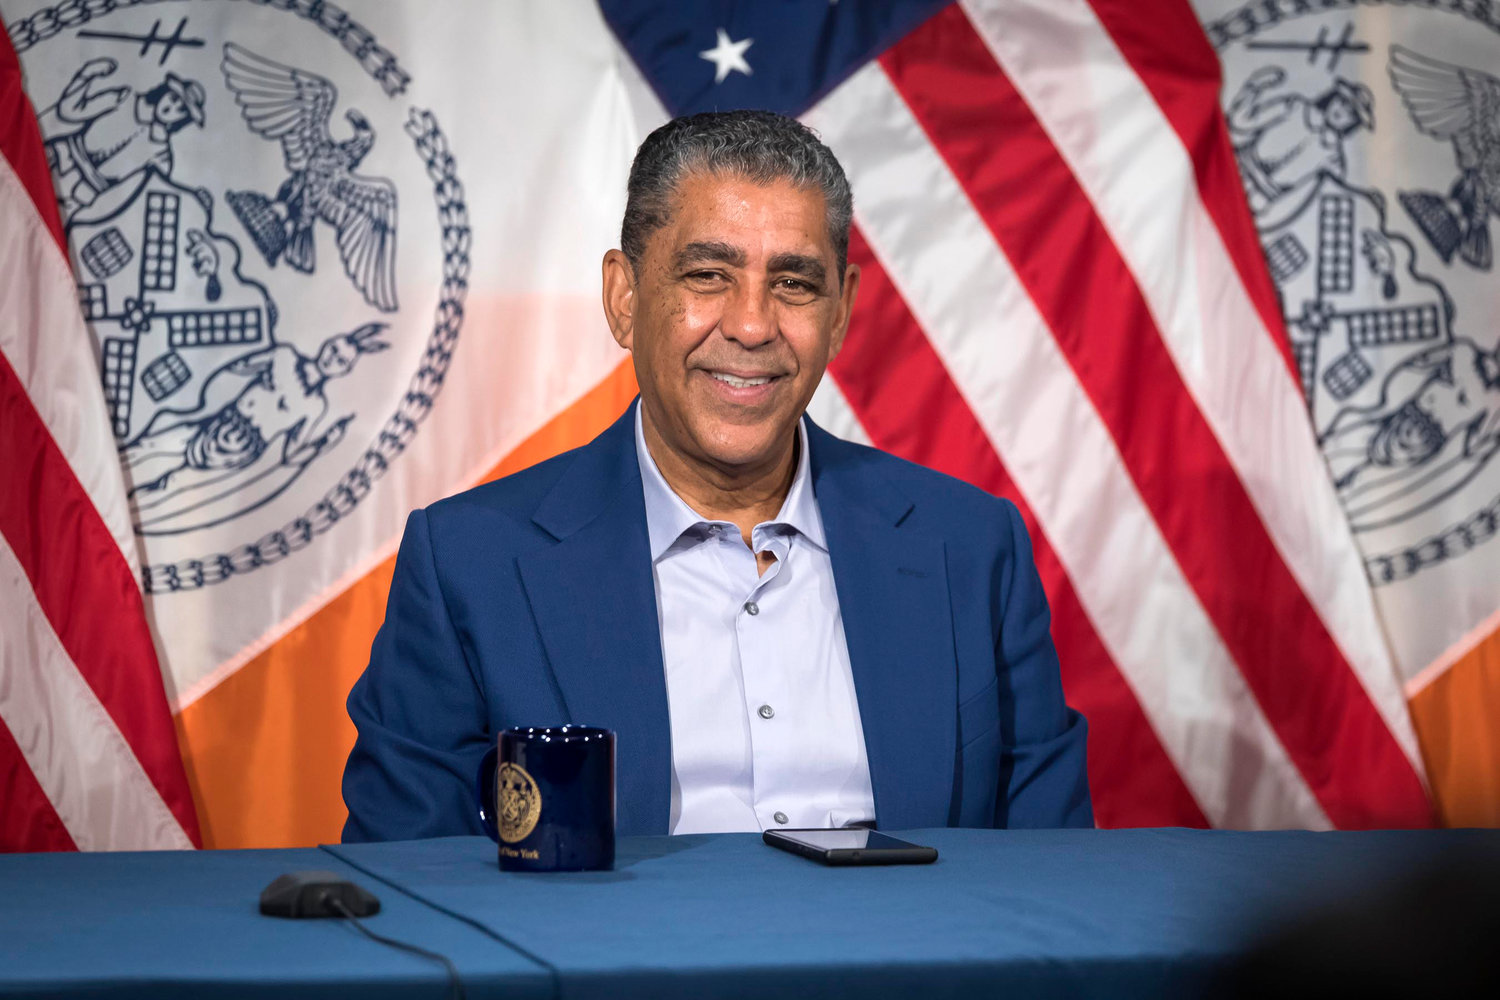 U.S. Rep. Adriano Espaillat has been influential in helping secure $8 million for businesses in his congressional district through the Shuttered Venue Operators Grant, a financial relief program established by the Small Business Administration to help gardens, zoos and theaters — among others — stay afloat during the worst of the coronavirus pandemic.